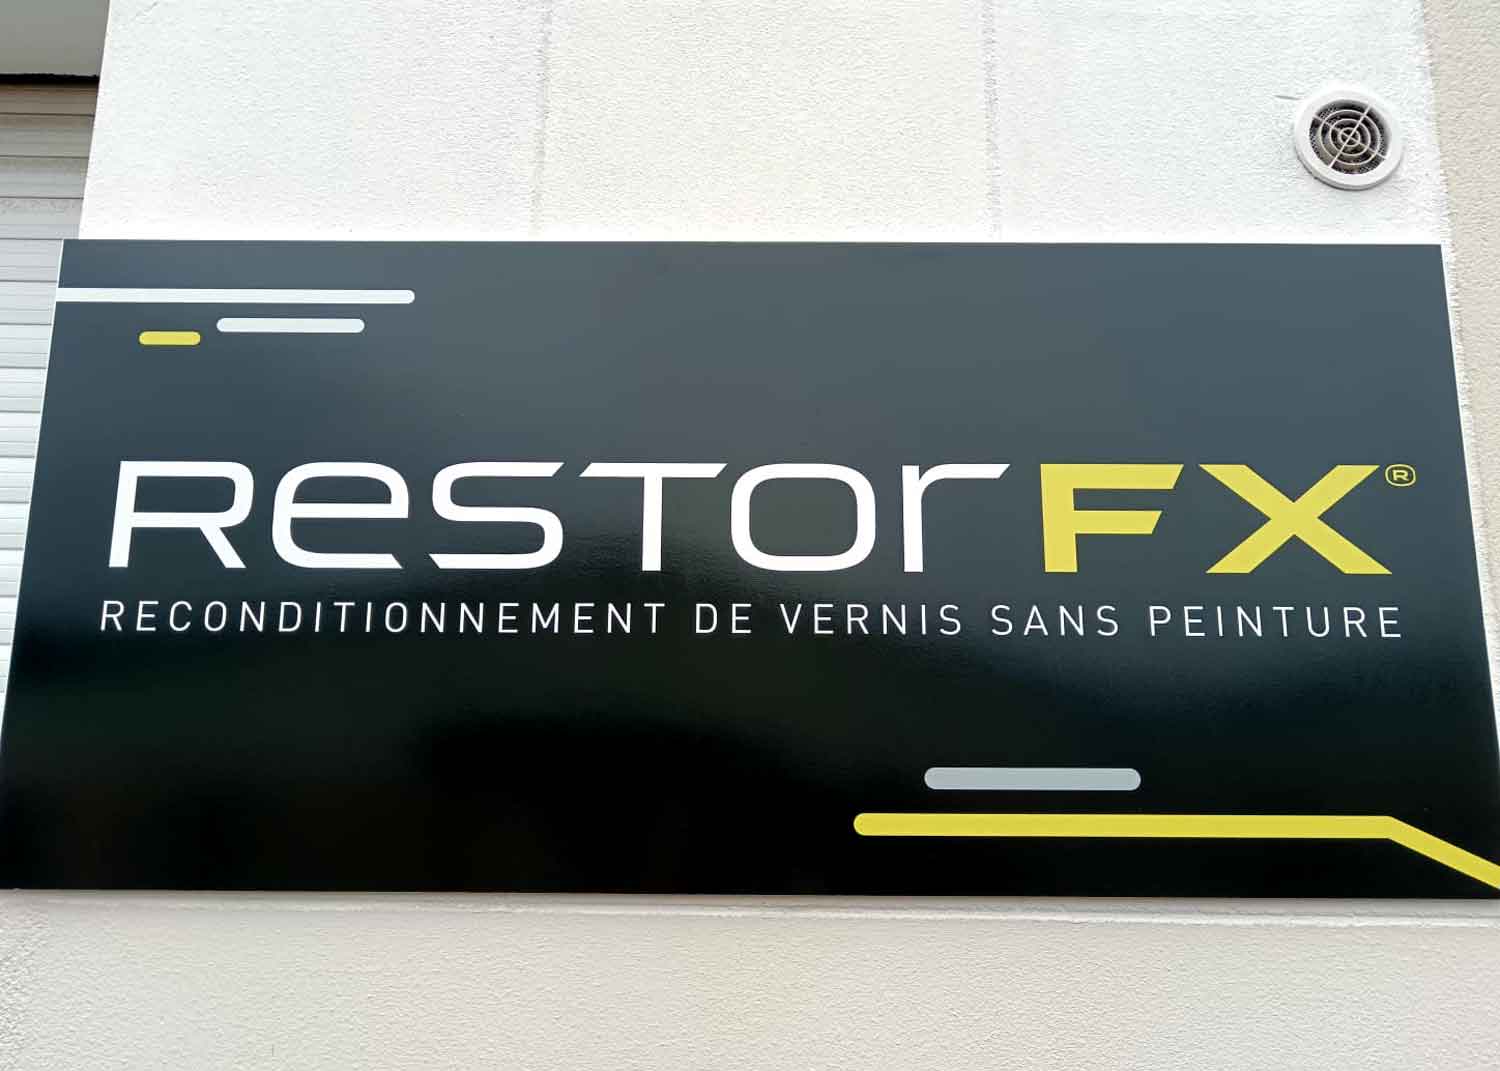 RestorFX La Rochelle sign mounted on the exterior wall